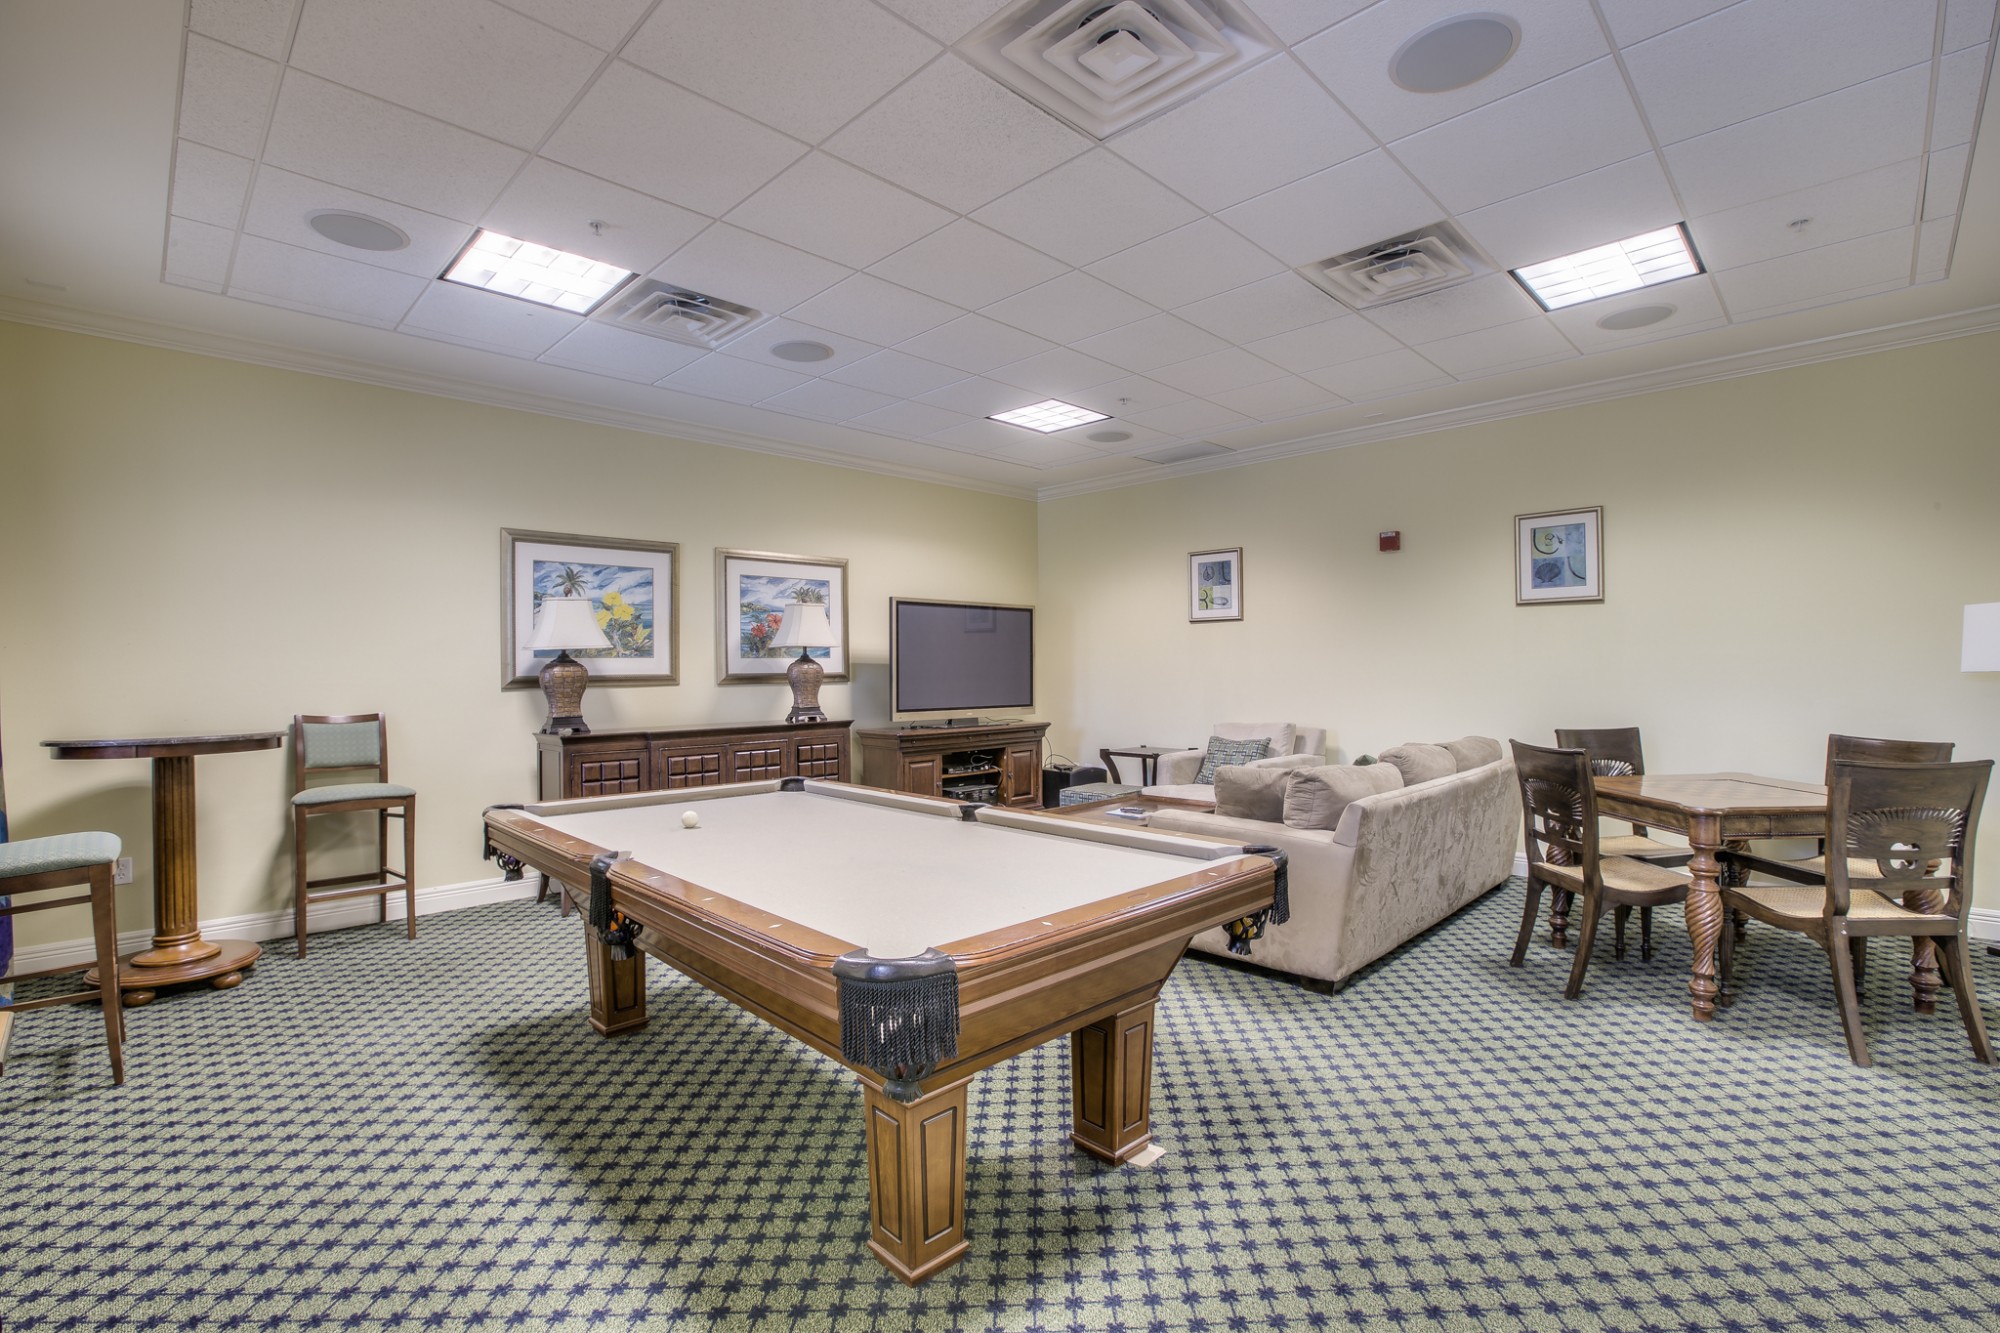 Pool Room/Media Room in the Clubhouse on the 2nd Floor